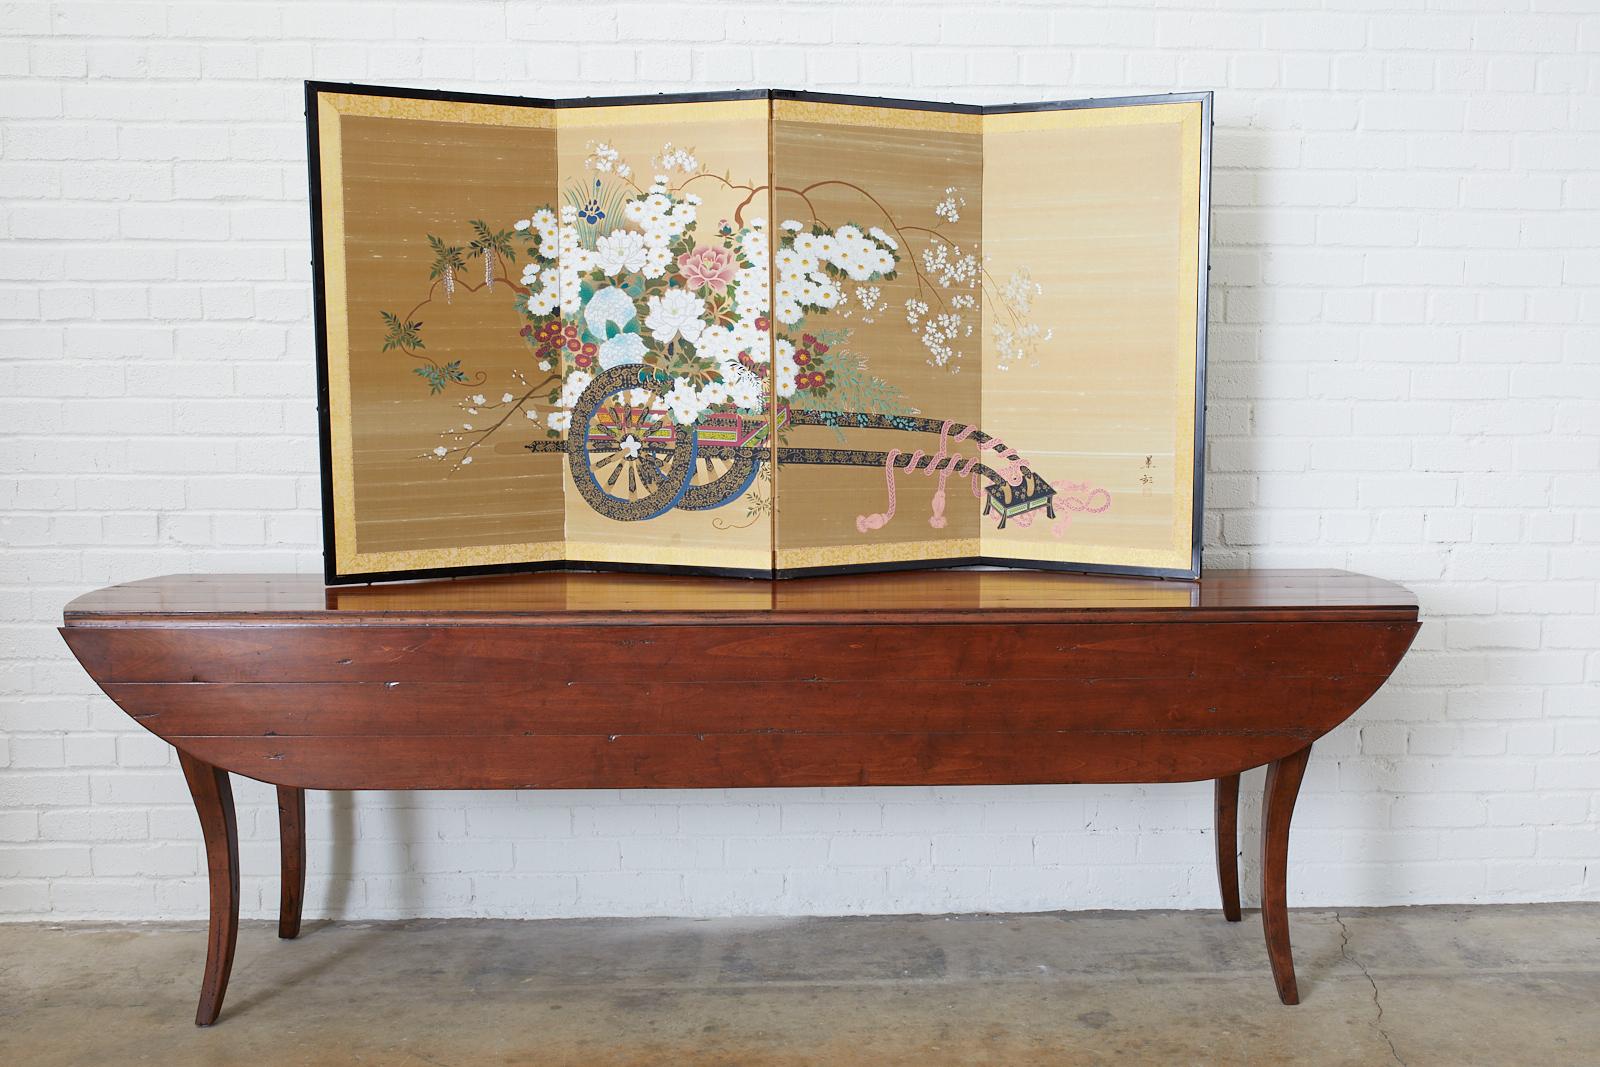 Beautiful Japanese Showa period four-panel silk screen depicting a colorful Hanaguruma or flower cart. A bountiful cornucopia of peonies, irises, wisteria, and chrysanthemums set in a festival style cart with parcel gilt embellishments and pink